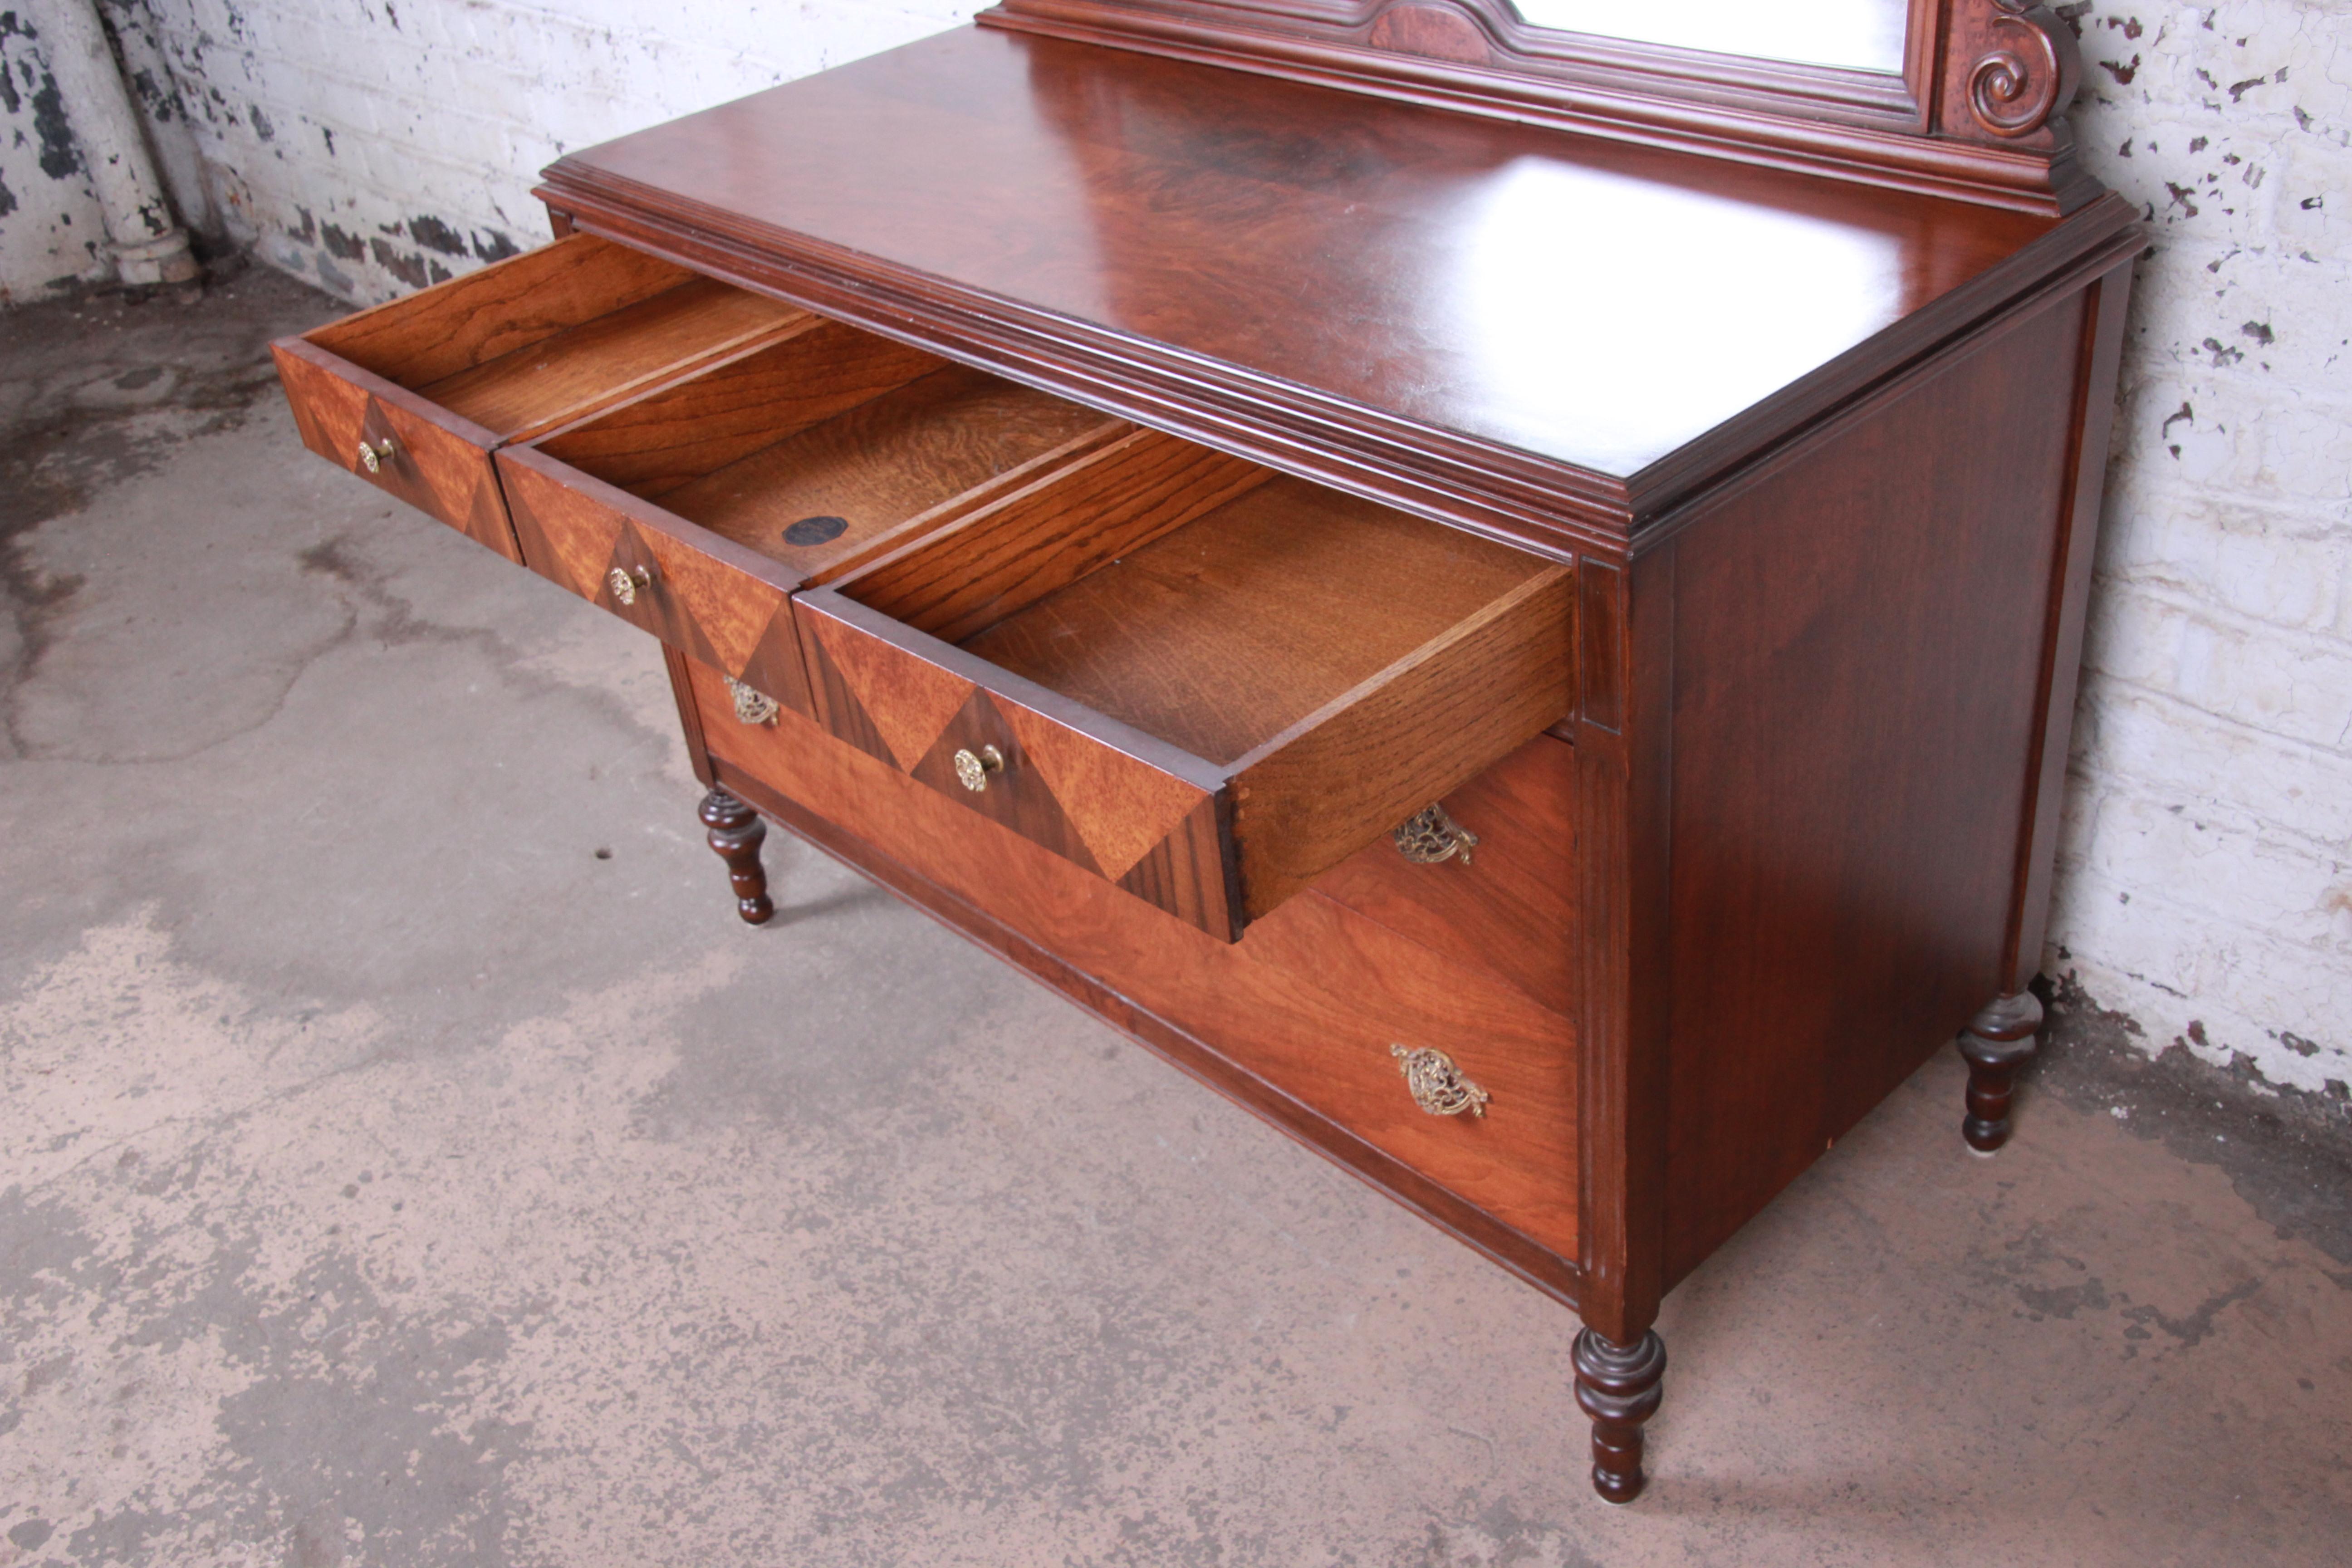 20th Century Antique Burled Walnut Dresser with Mirror Attributed to Baker Furniture, 1920s